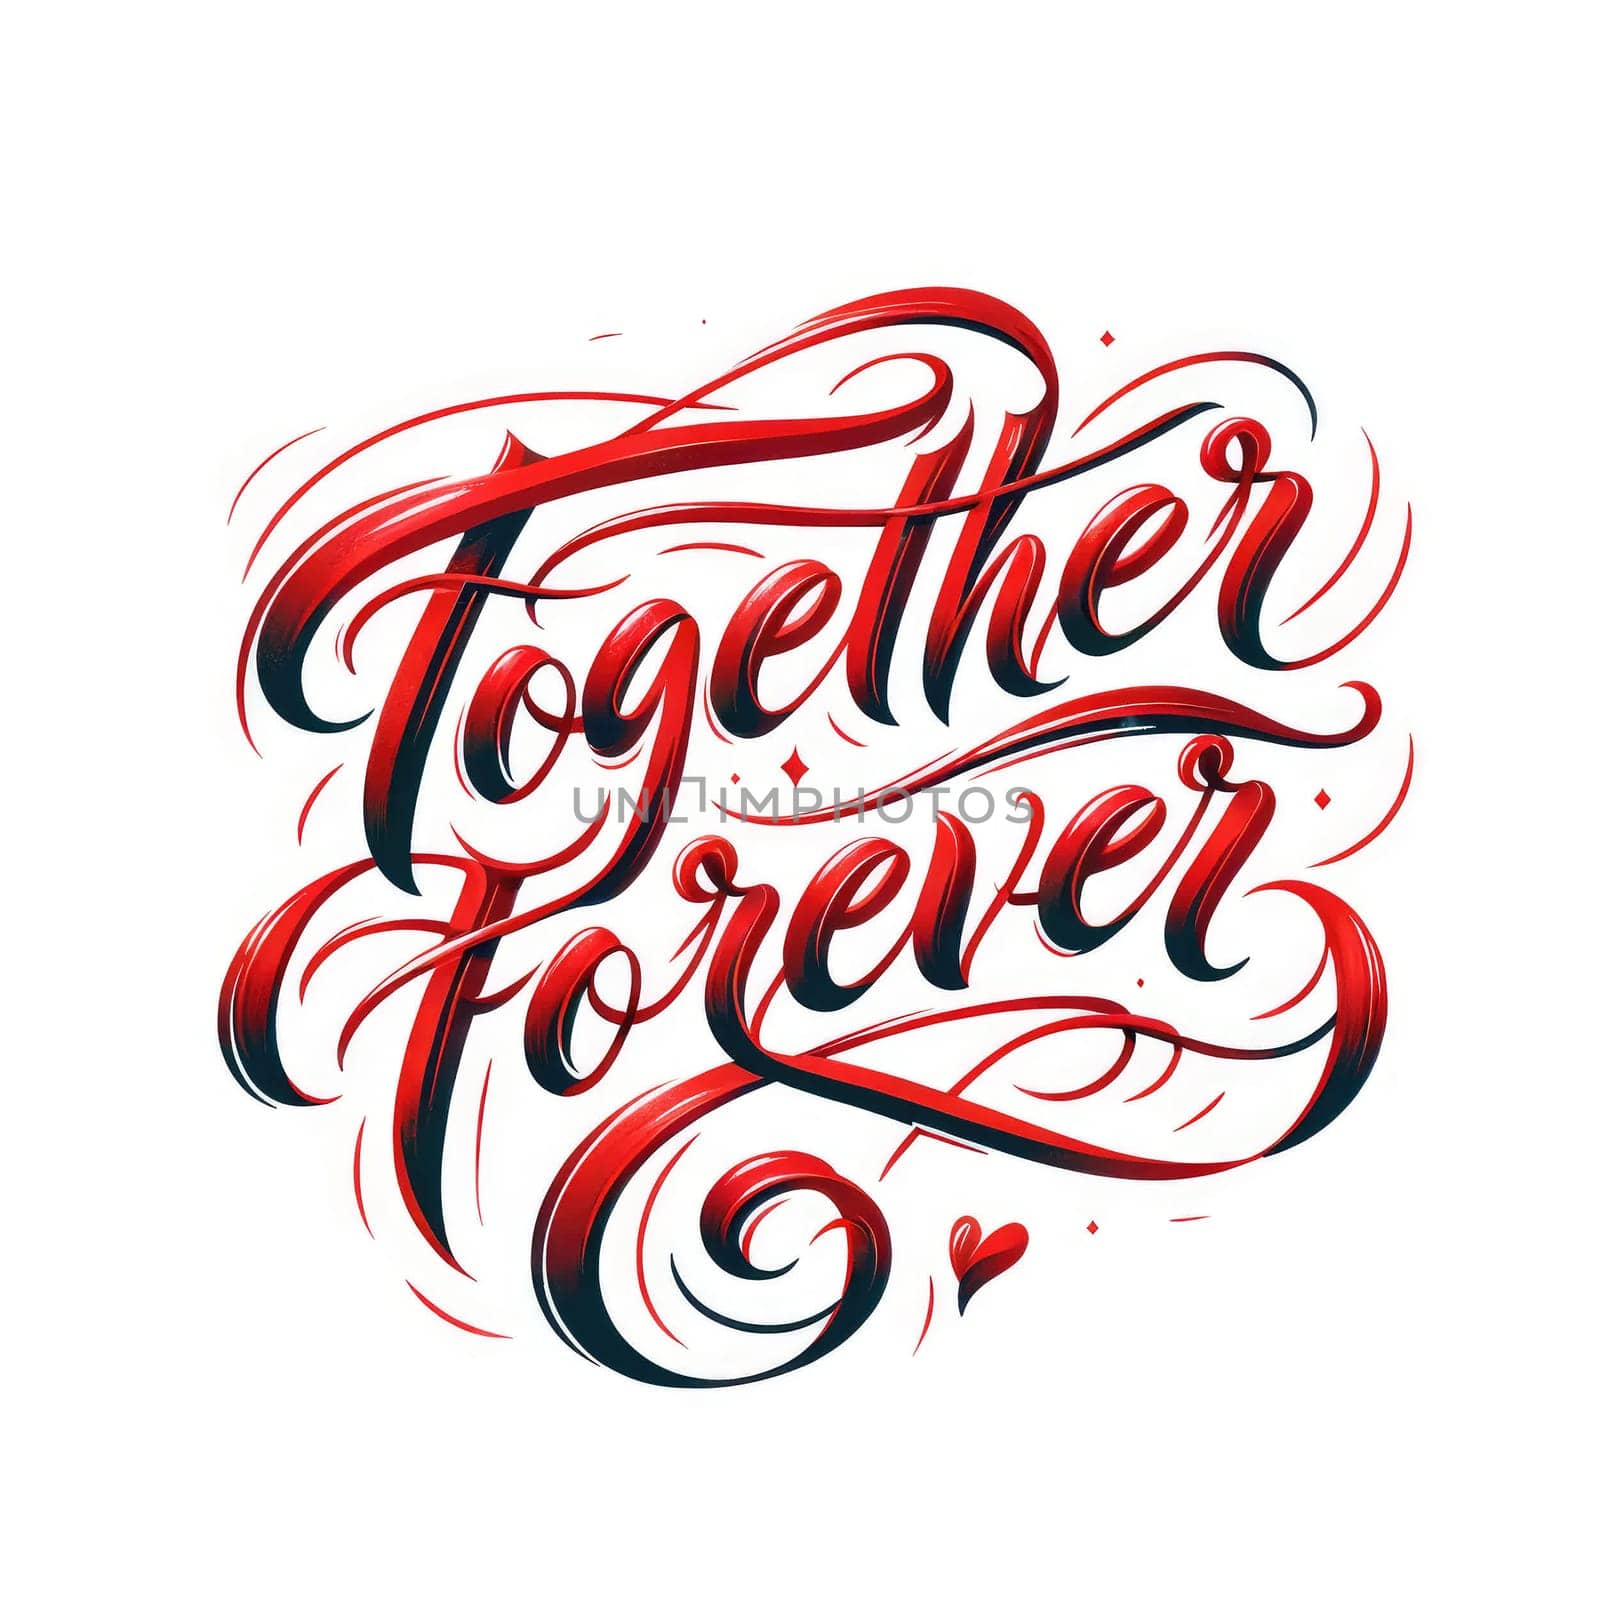 Valentines day quote in style of handwritten script typography